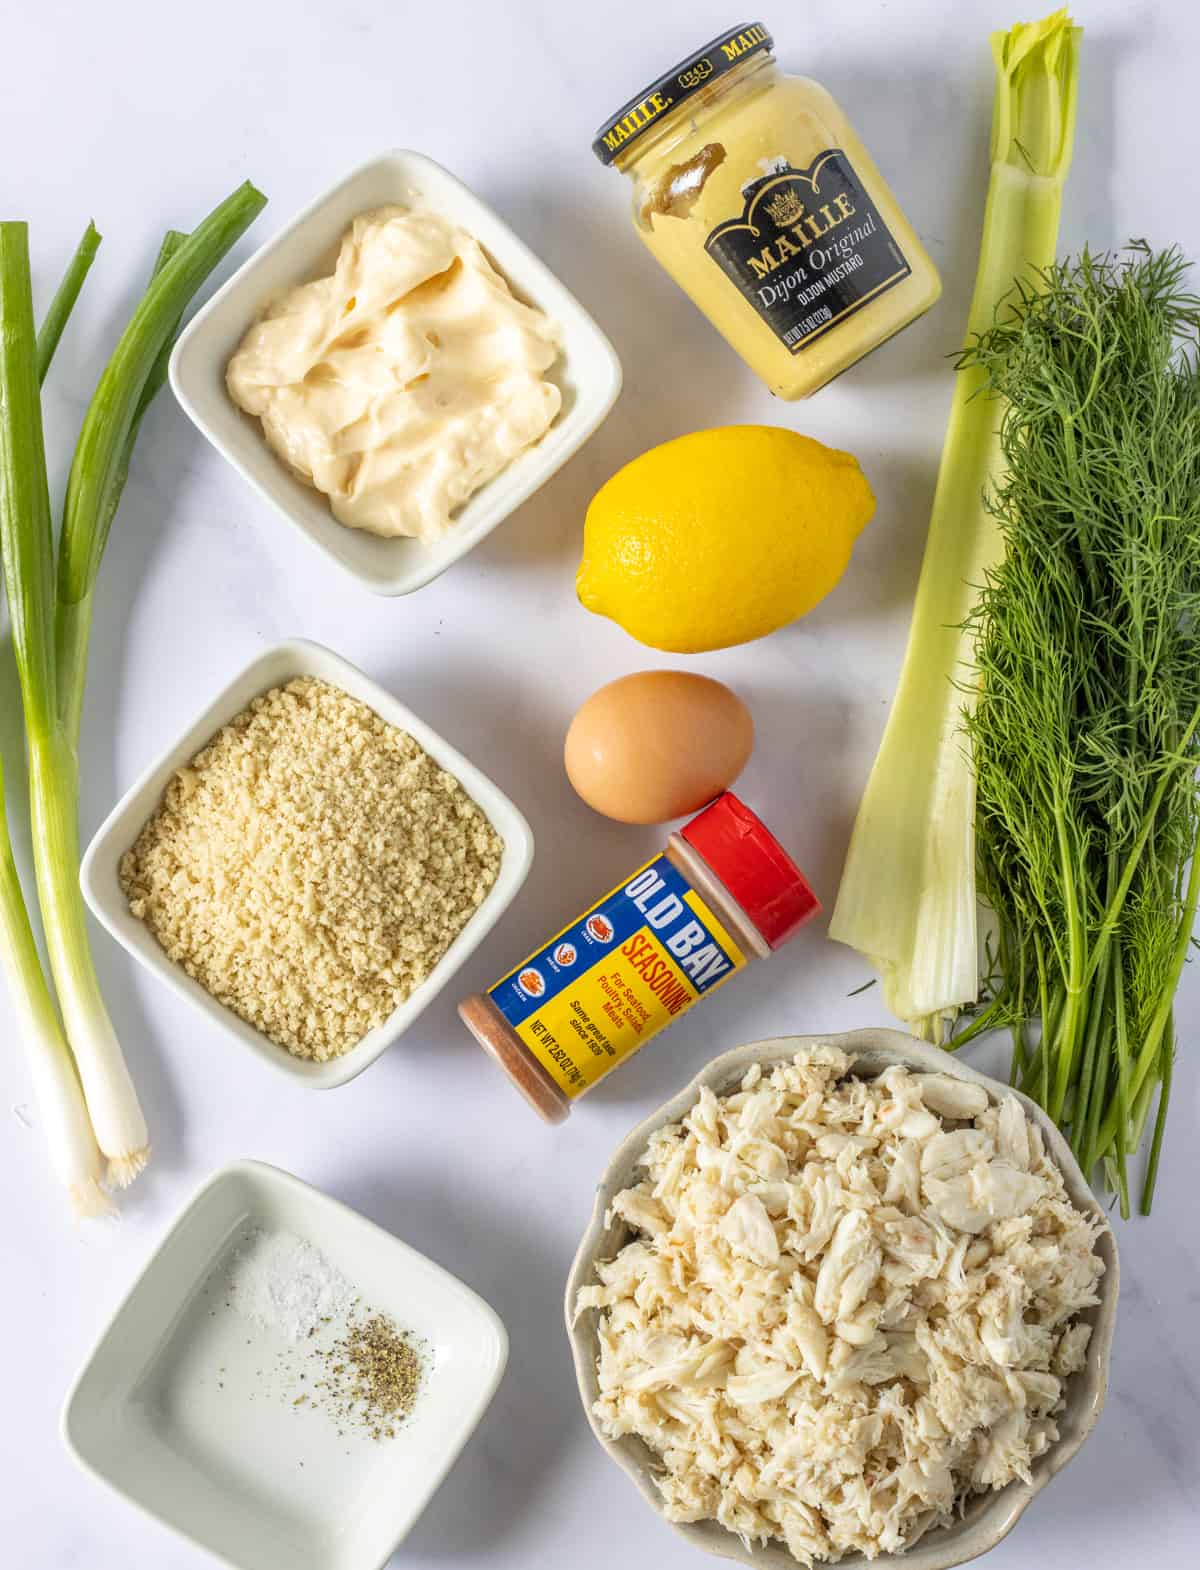 Ingredients for crab cakes with remoulade sauce.